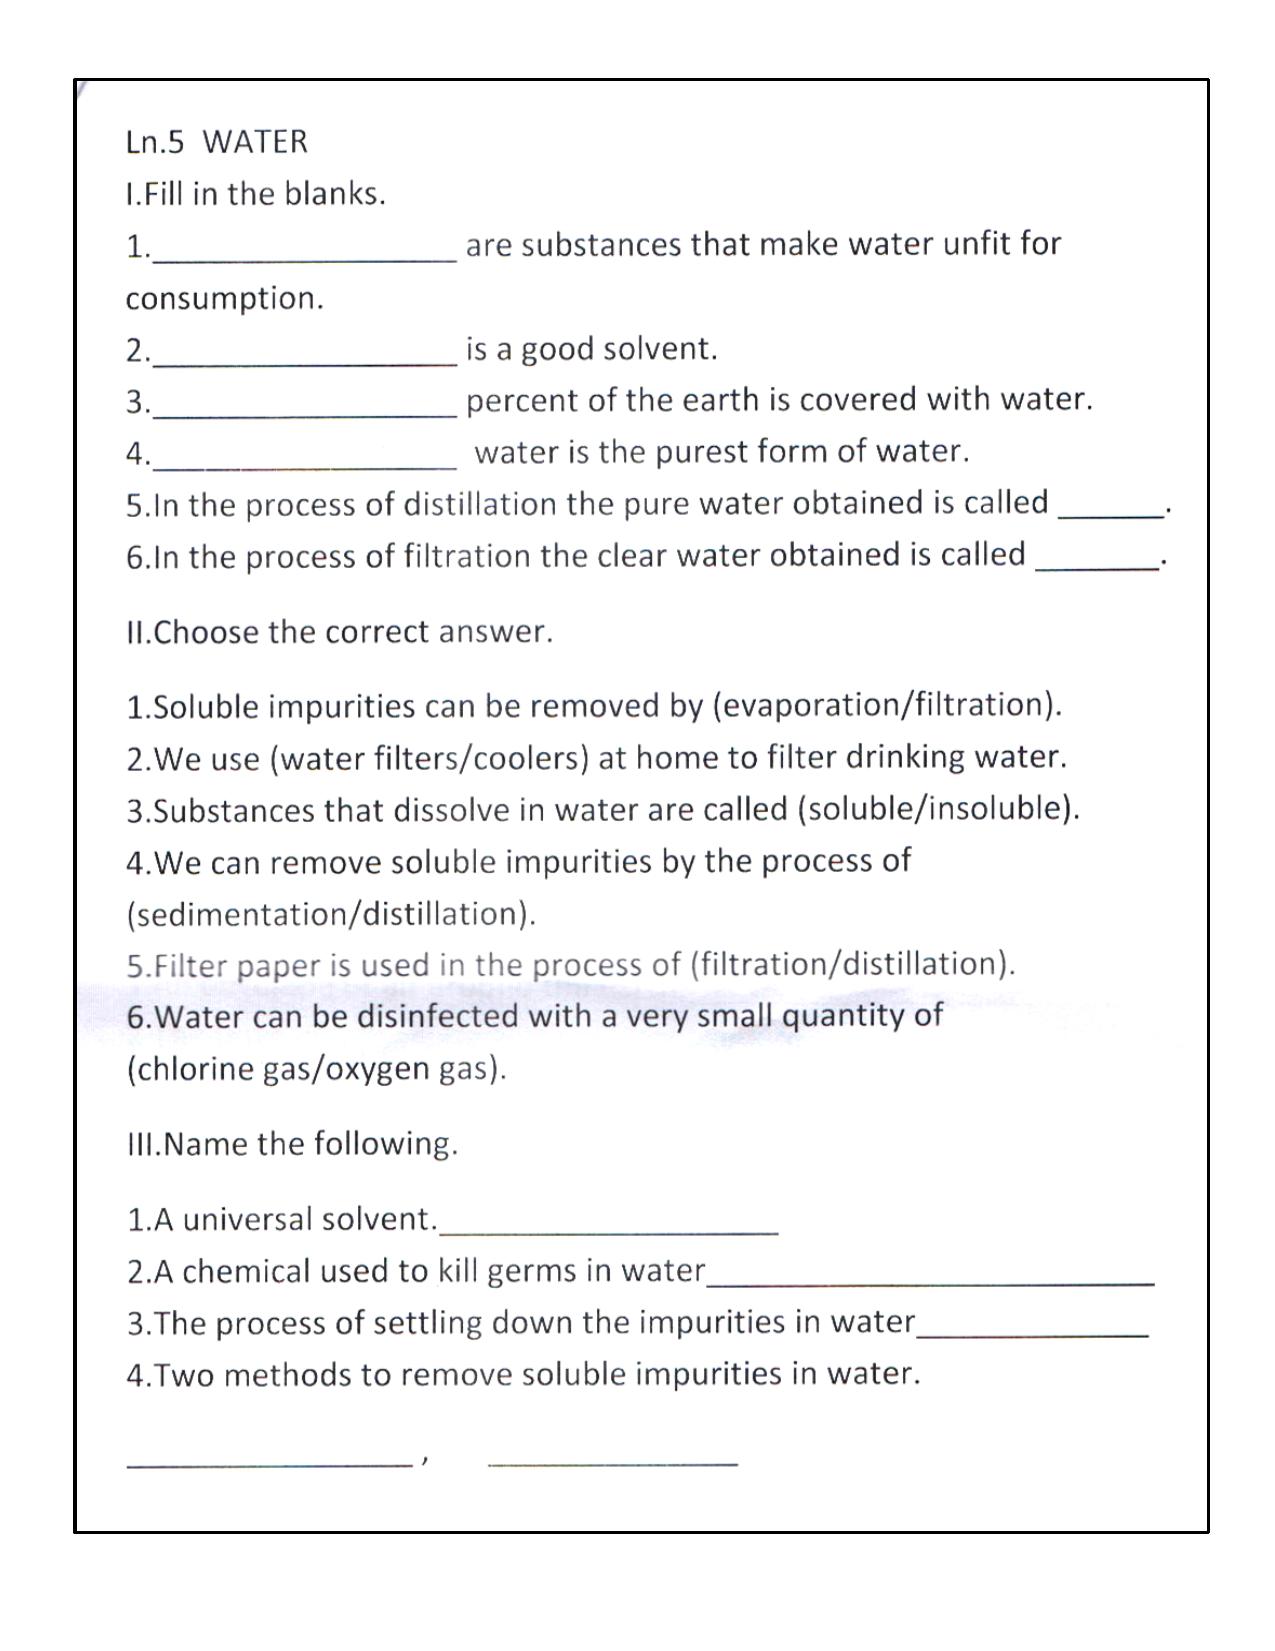 Worksheet for Class 5 Science Water Assignment 3 - Page 1